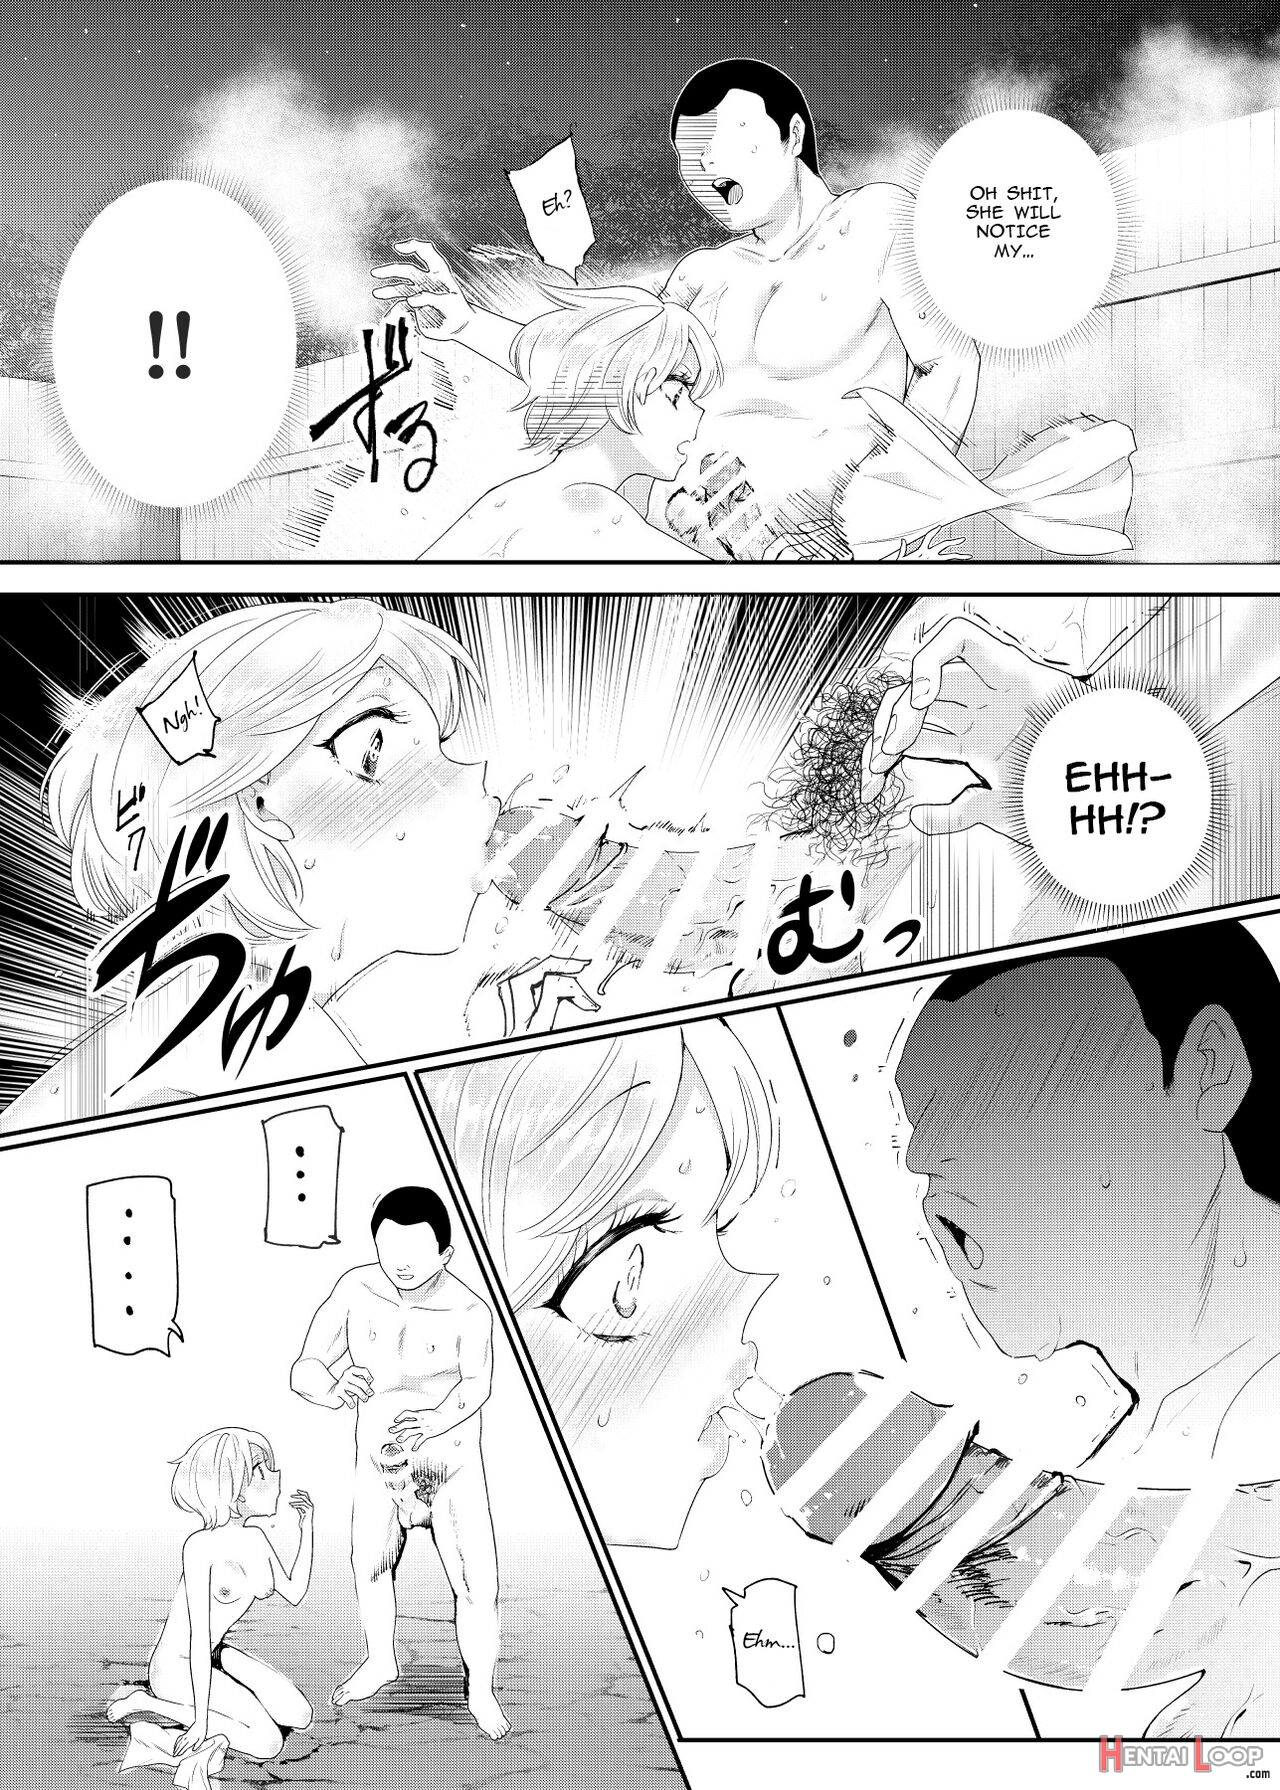 Then You Shouldn't Worry, Because I'm A Girl! Ex! page 8